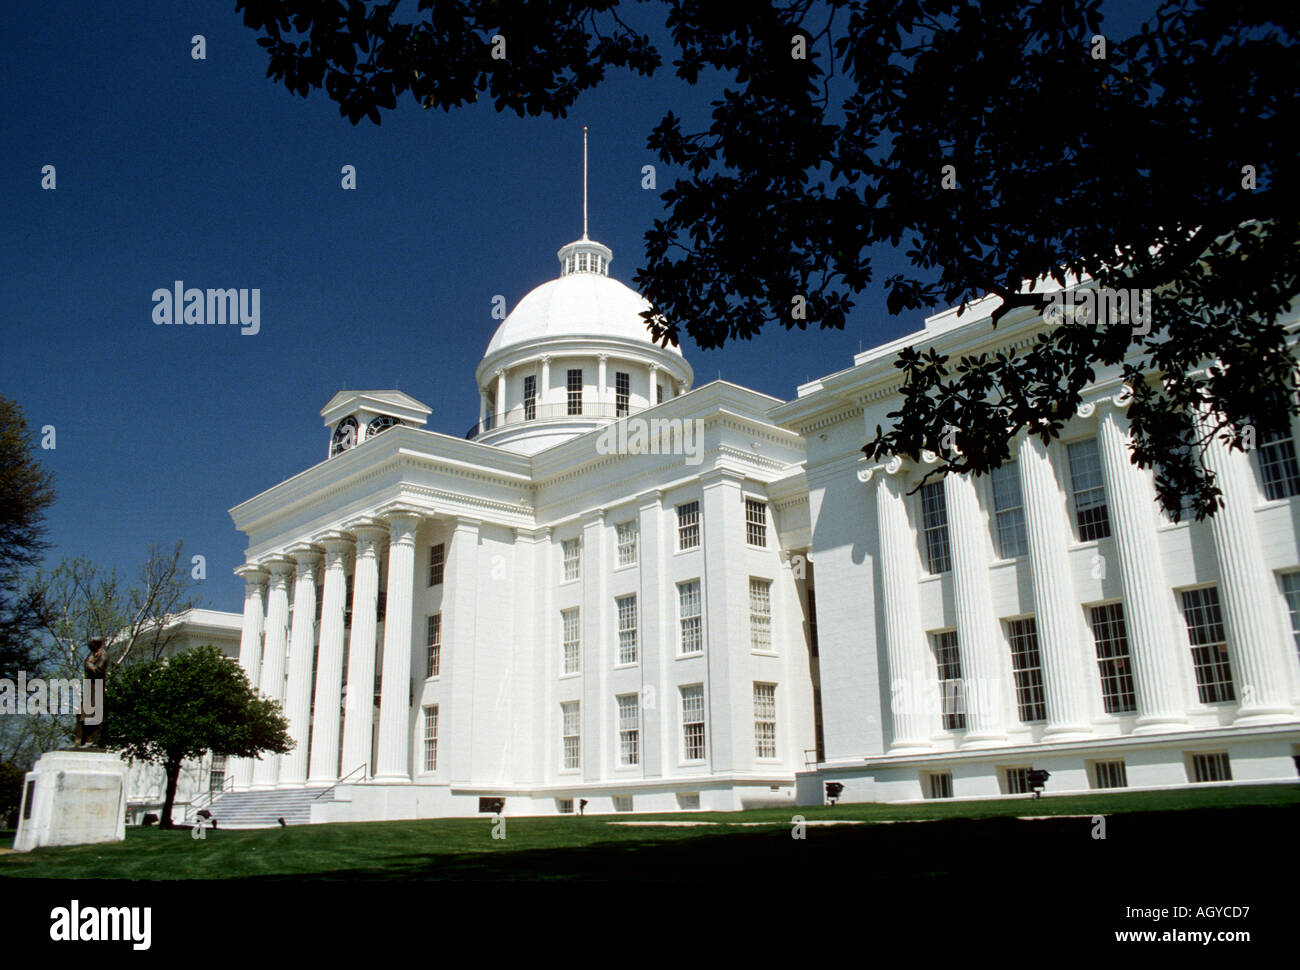 Montgomery Alabama State Capitol Building Banque D'Images